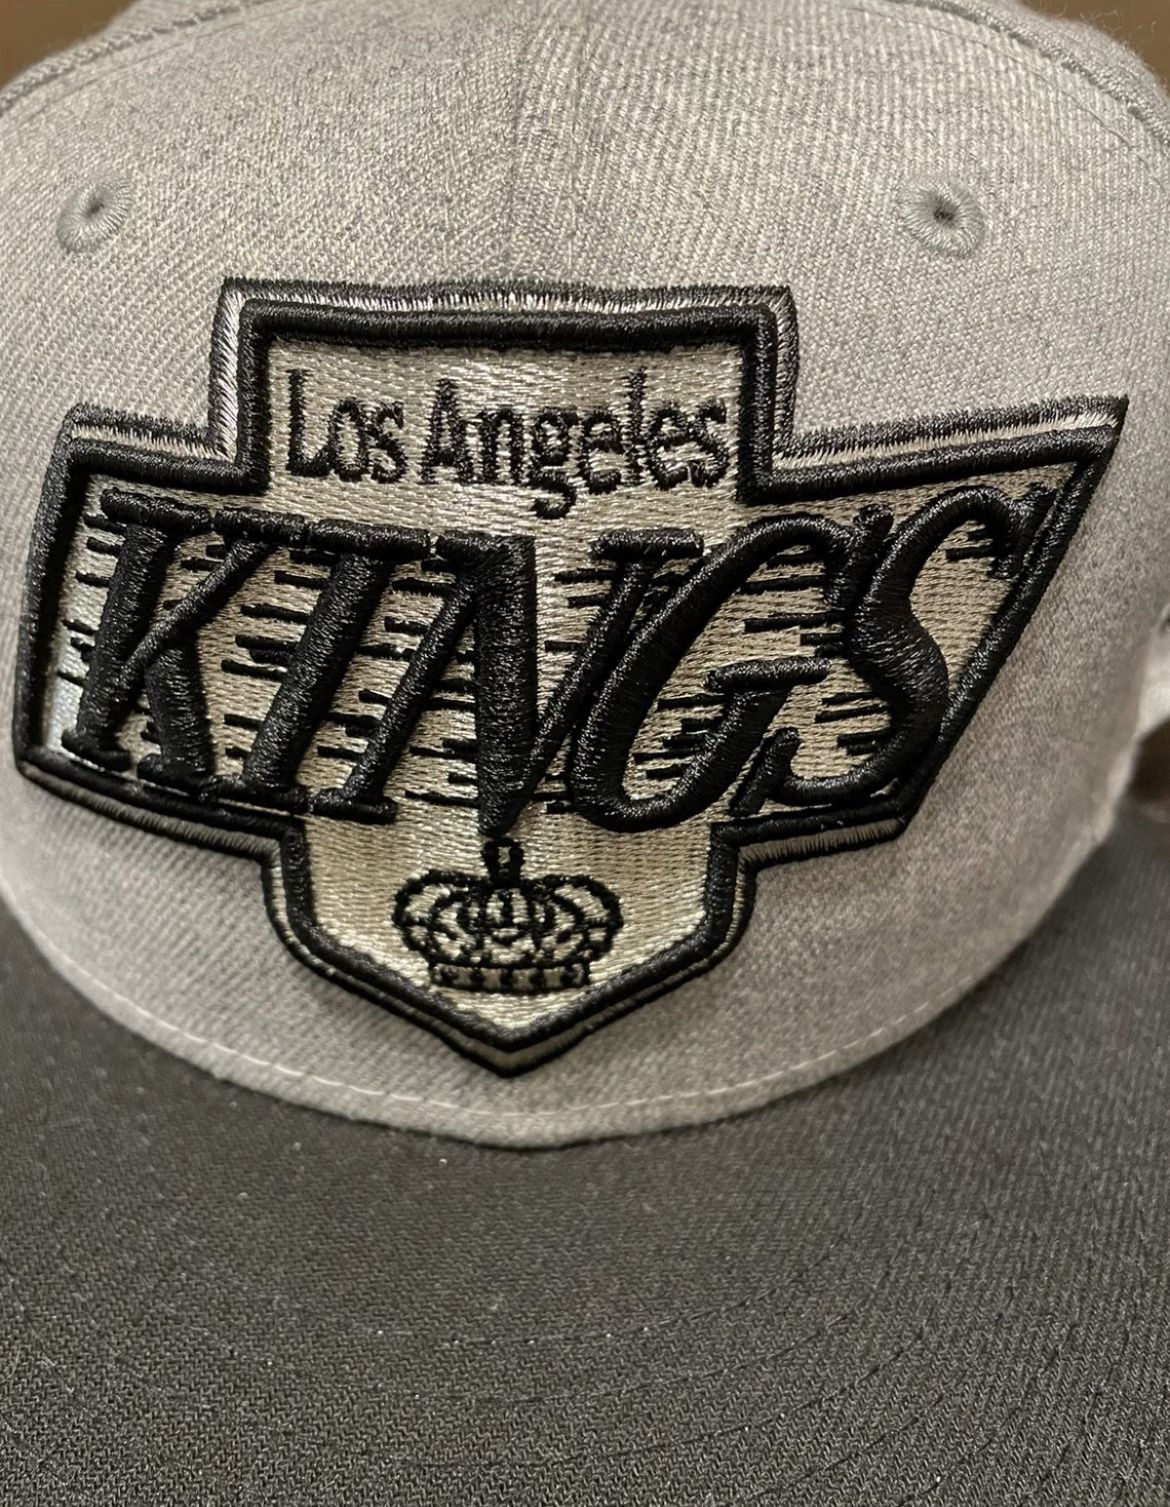 LA Kings New Era Fitted Hat RARE for Sale in Huntington Beach, CA - OfferUp